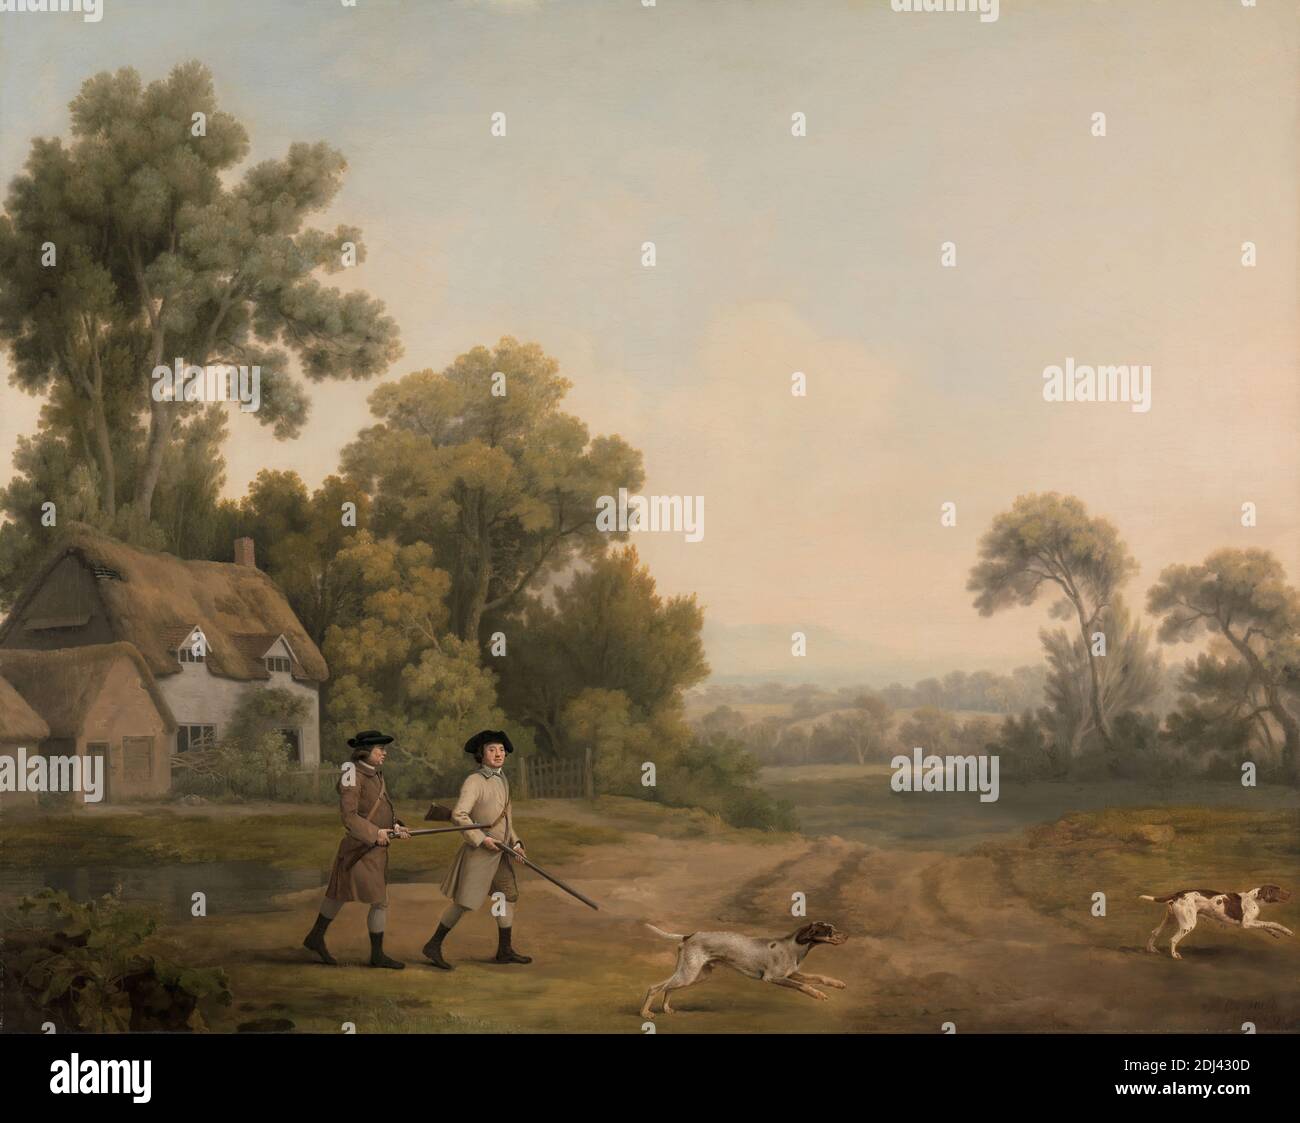 Two Gentlemen Going a Shooting, George Stubbs, 1724–1806, British, 1768, Oil on canvas, Support (PTG): 39 15/16 x 50 1/16 inches (101.4 x 127.2 cm), costume, cottage, dogs (animals), field, guns, hills, hunters, hunting, landscape, limestone, men, rifles (long guns), running, rural areas, series (groups), sporting art, sportsmen, village, walking, Creswell, Derbyshire, England, Nottinghamshire, United Kingdom Stock Photo